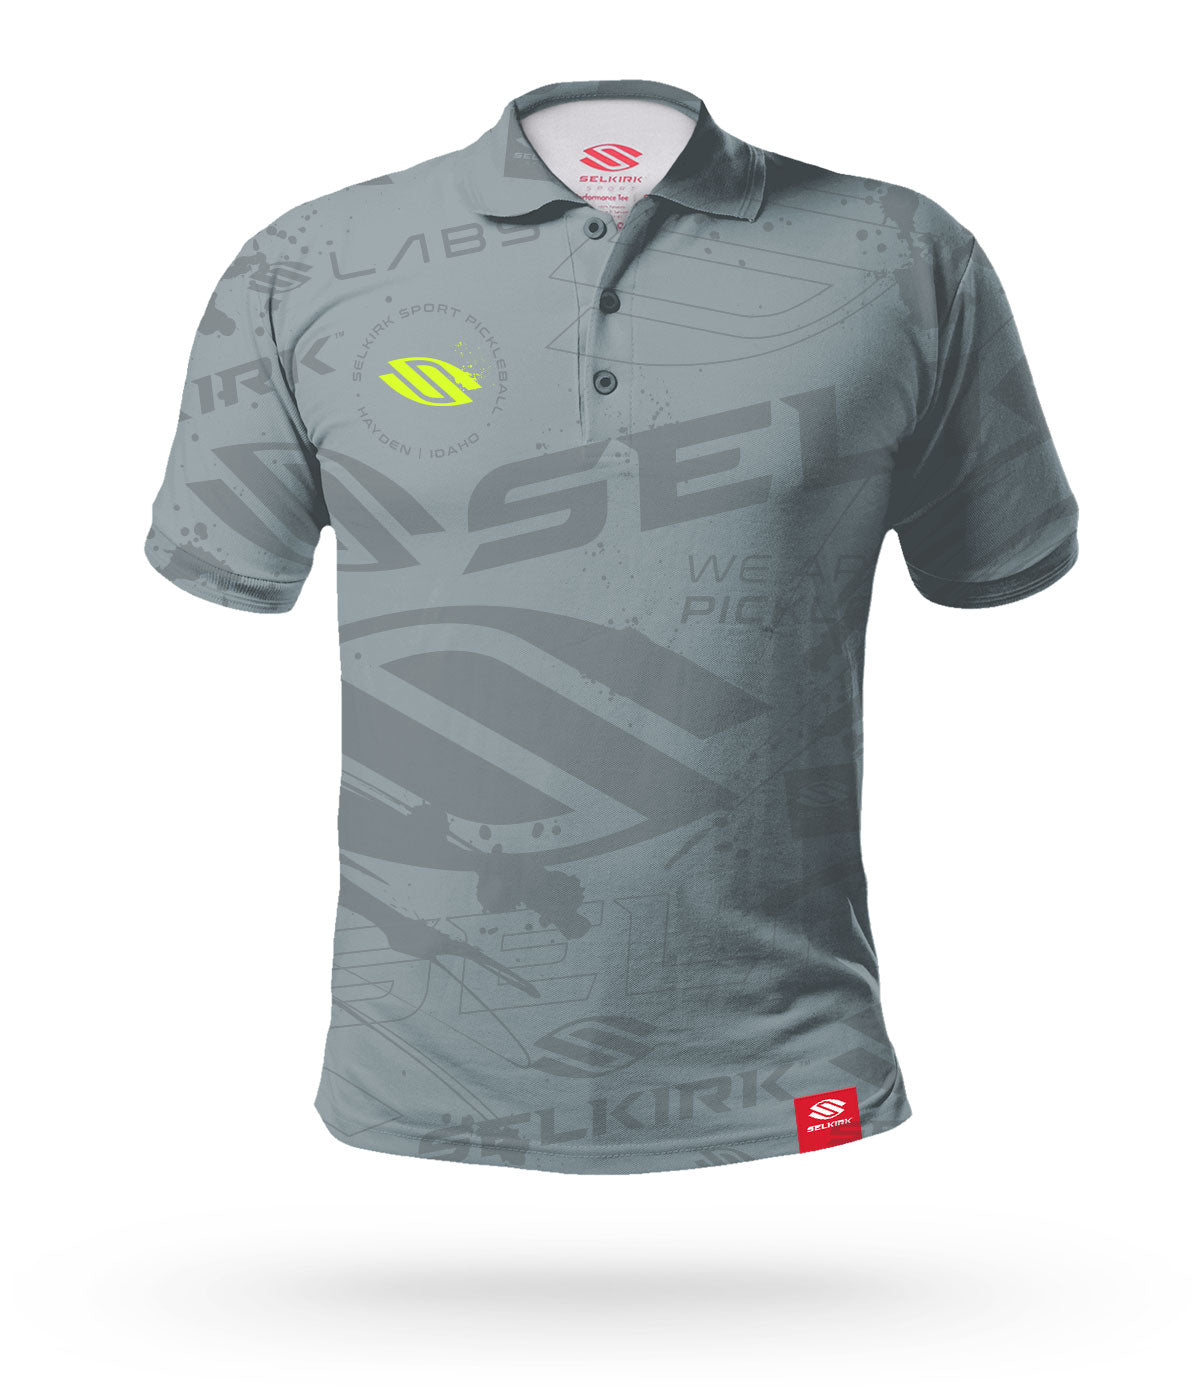 Crafted for Selkirk Sport pickleball athletes and fans, introducing the Selkirk Emblem Men's Polo pickleball shirt with Selkirk's Stretch-Wik Technology in Gray, Blue, and Green. Perfect for pickleball players.